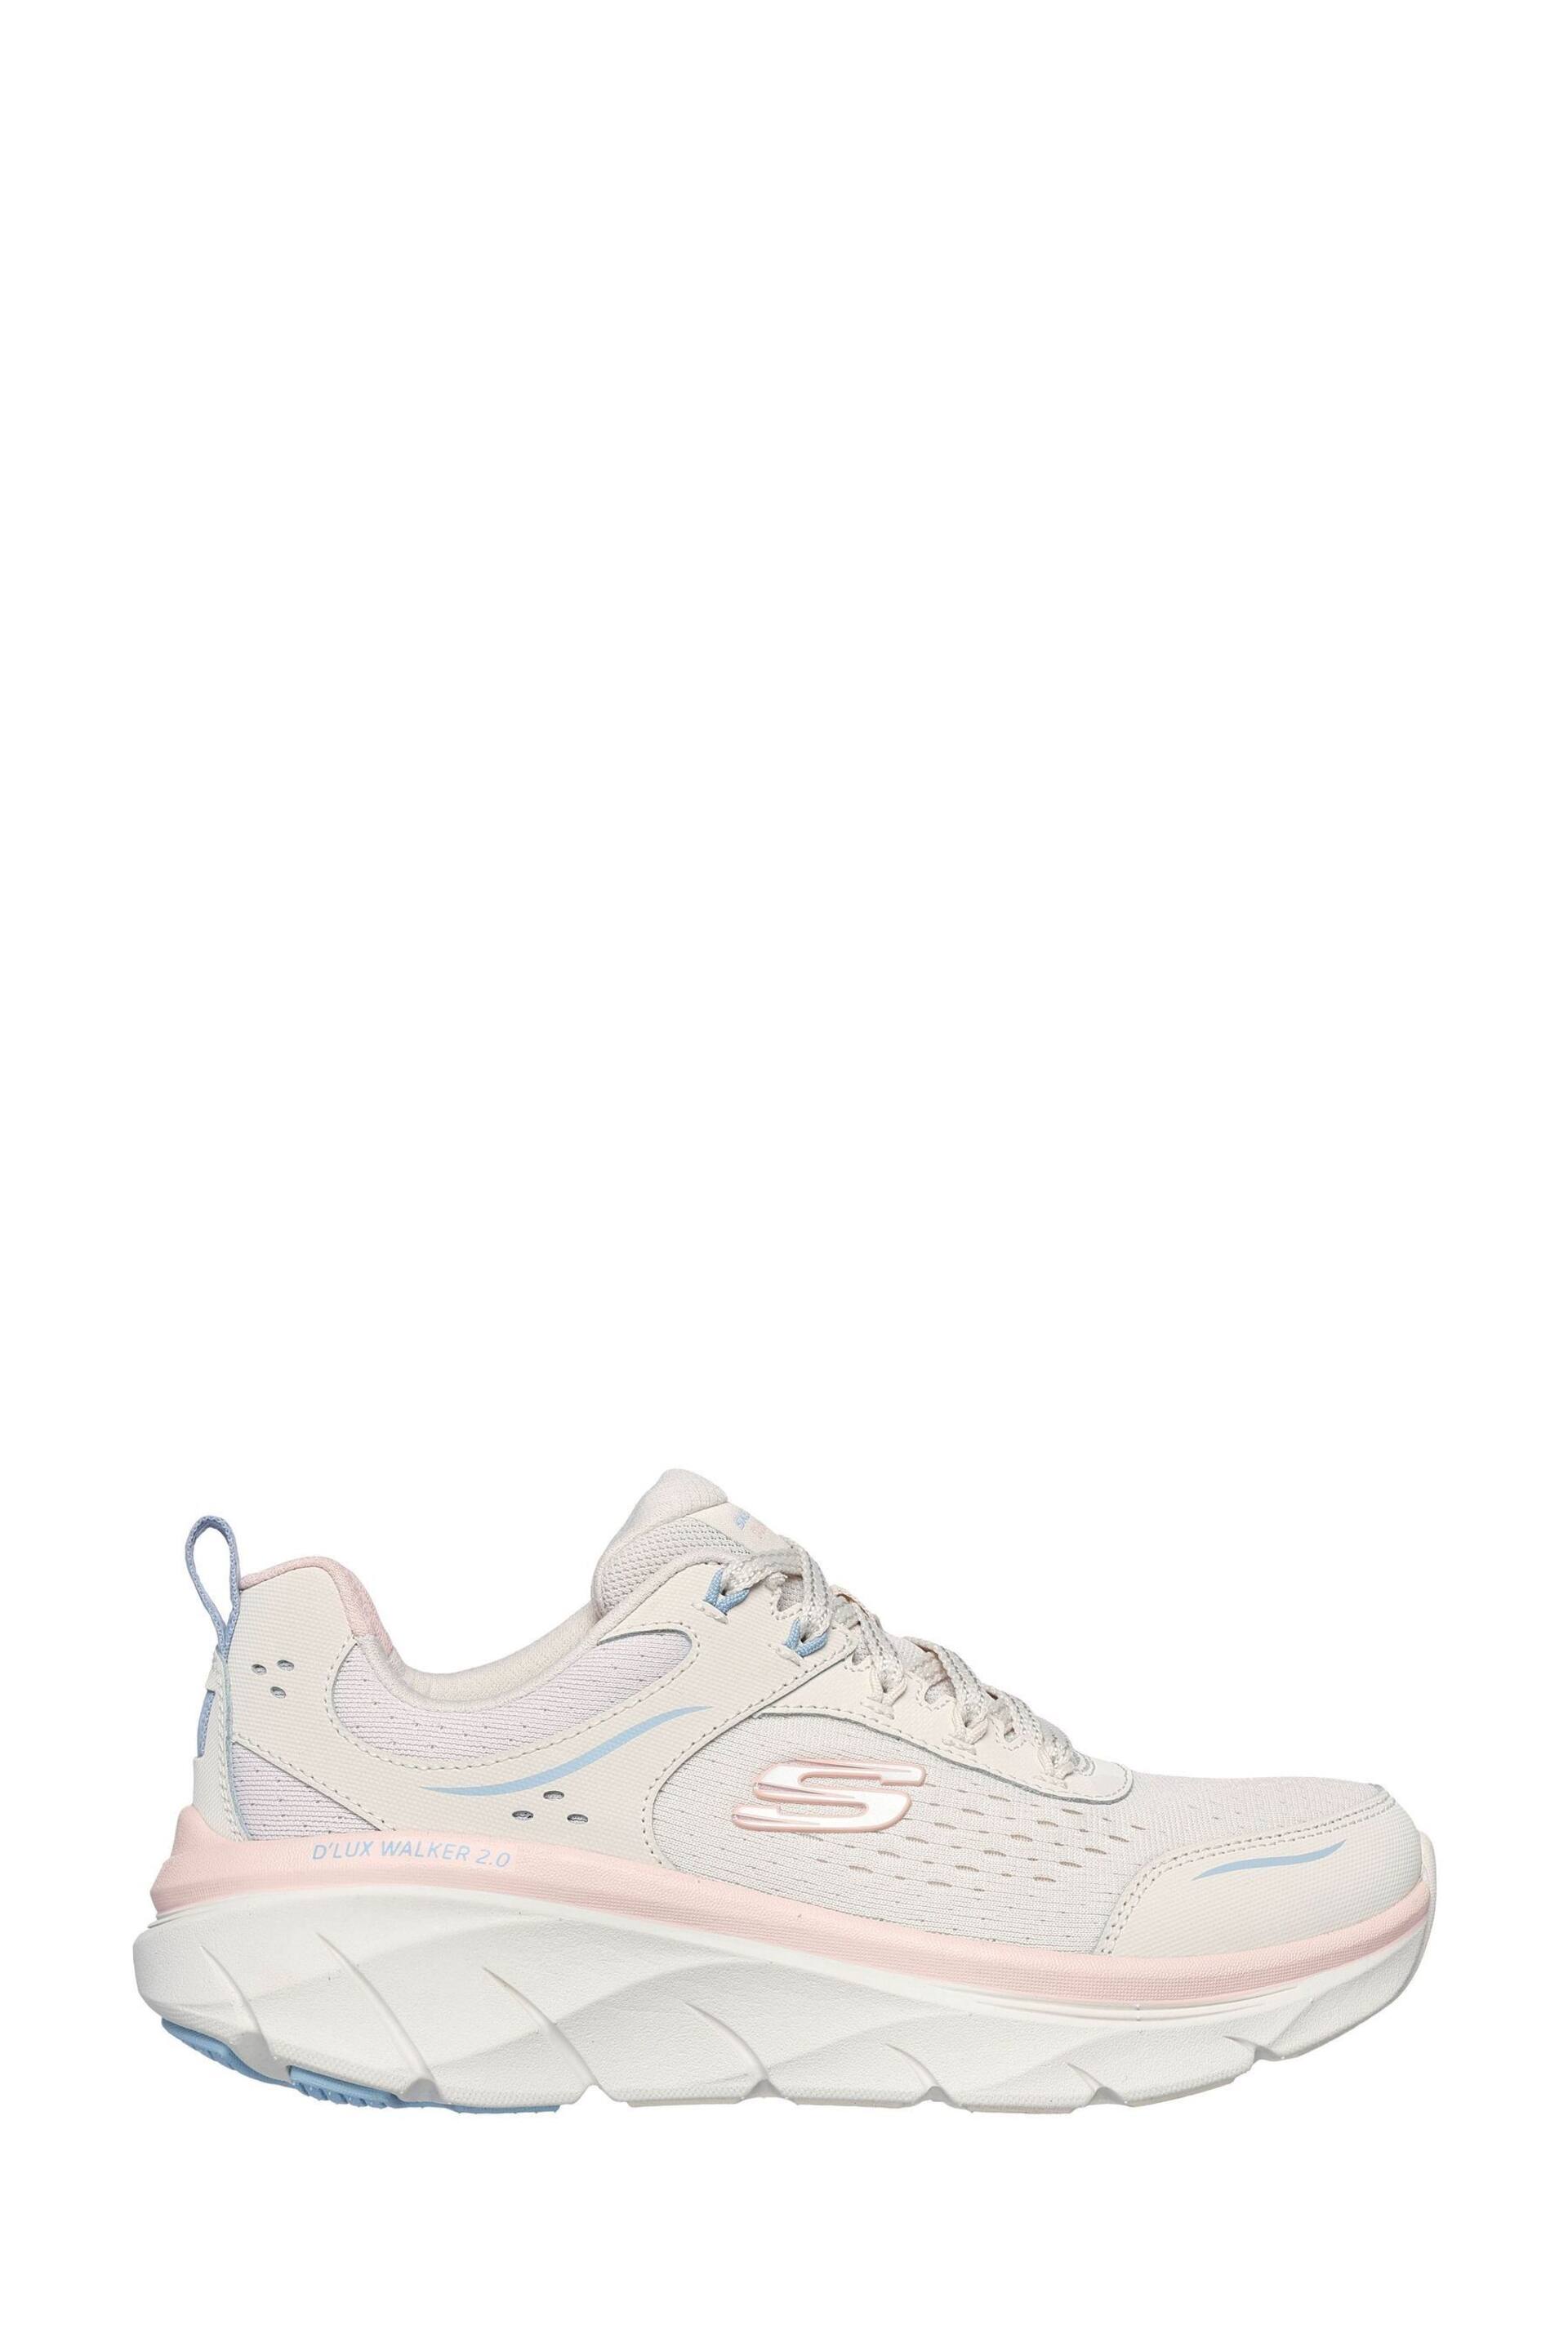 Skechers Natural D’Lux Walker 2.0 Daisy Doll Trainers - Image 1 of 5